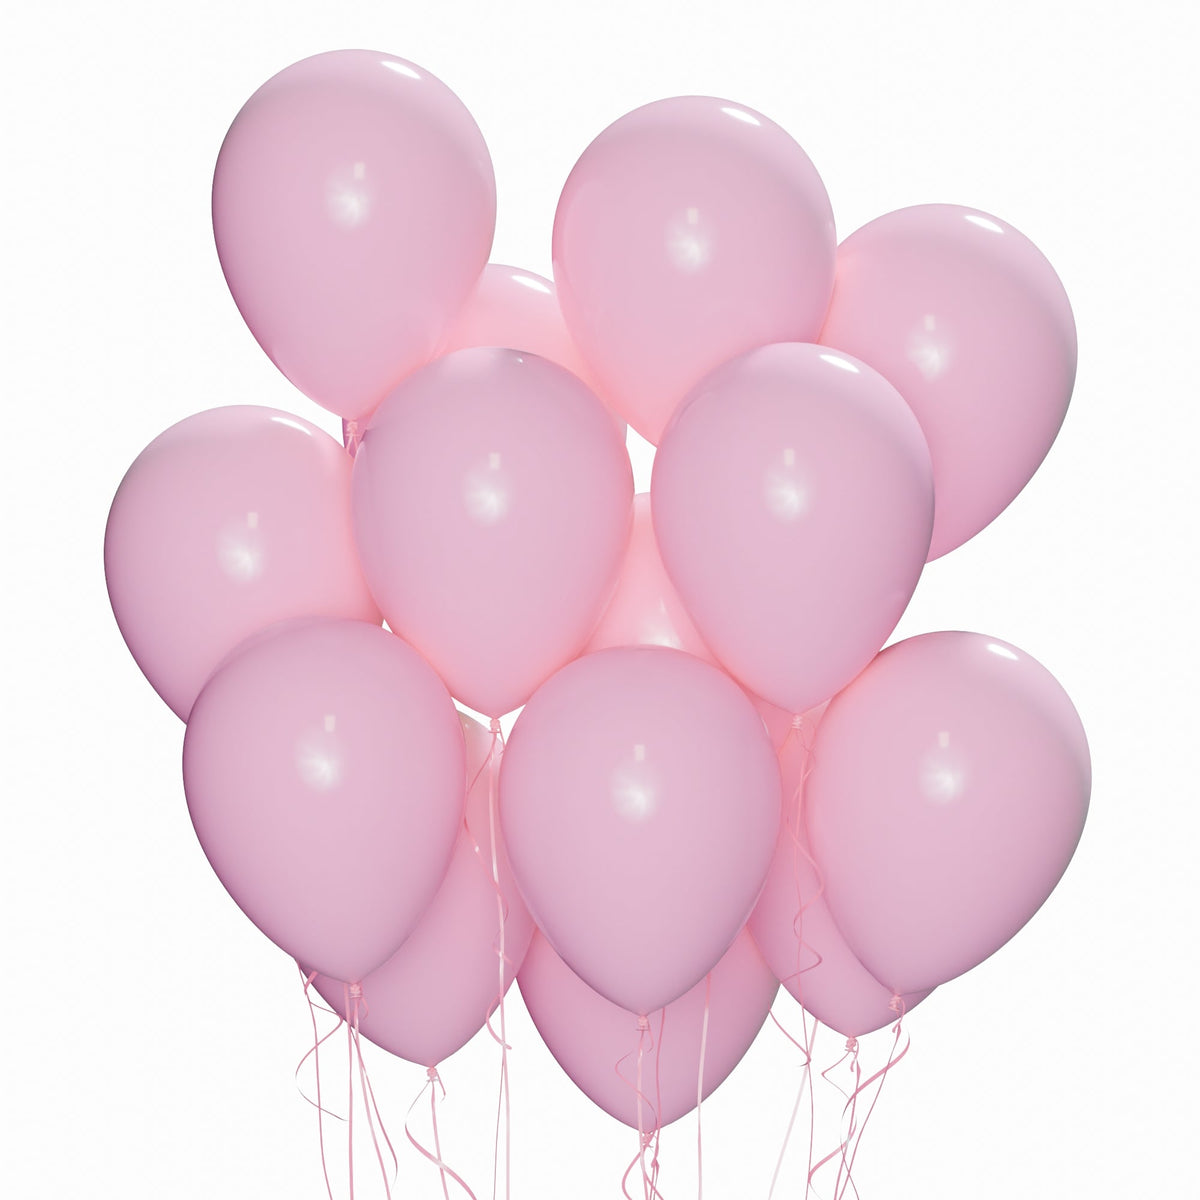 WIDE OCEAN INTERNATIONAL TRADE BEIJING CO., LTD Balloons Pink Latex Balloon 12 Inches, Macaroon Collection, 15 Count 810064198960